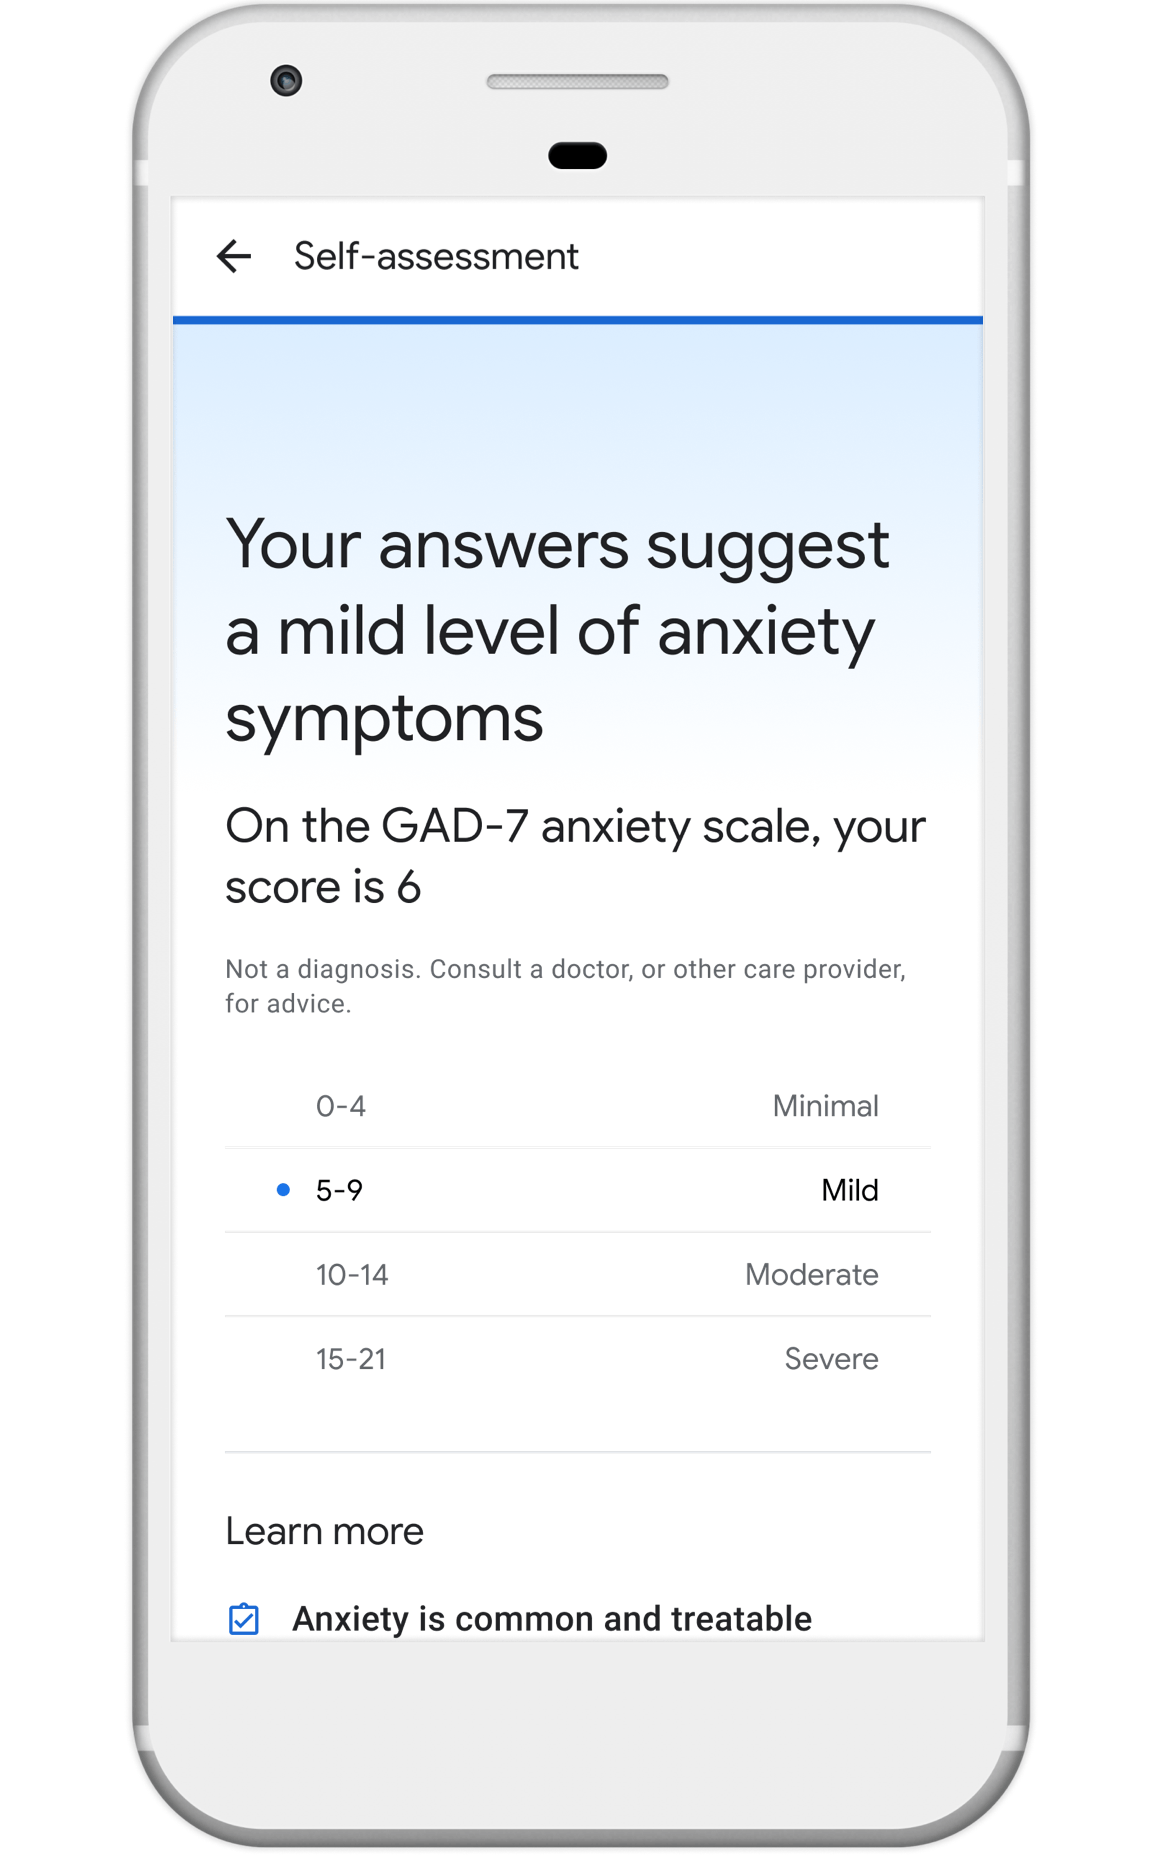 Anxiety self-assessment results